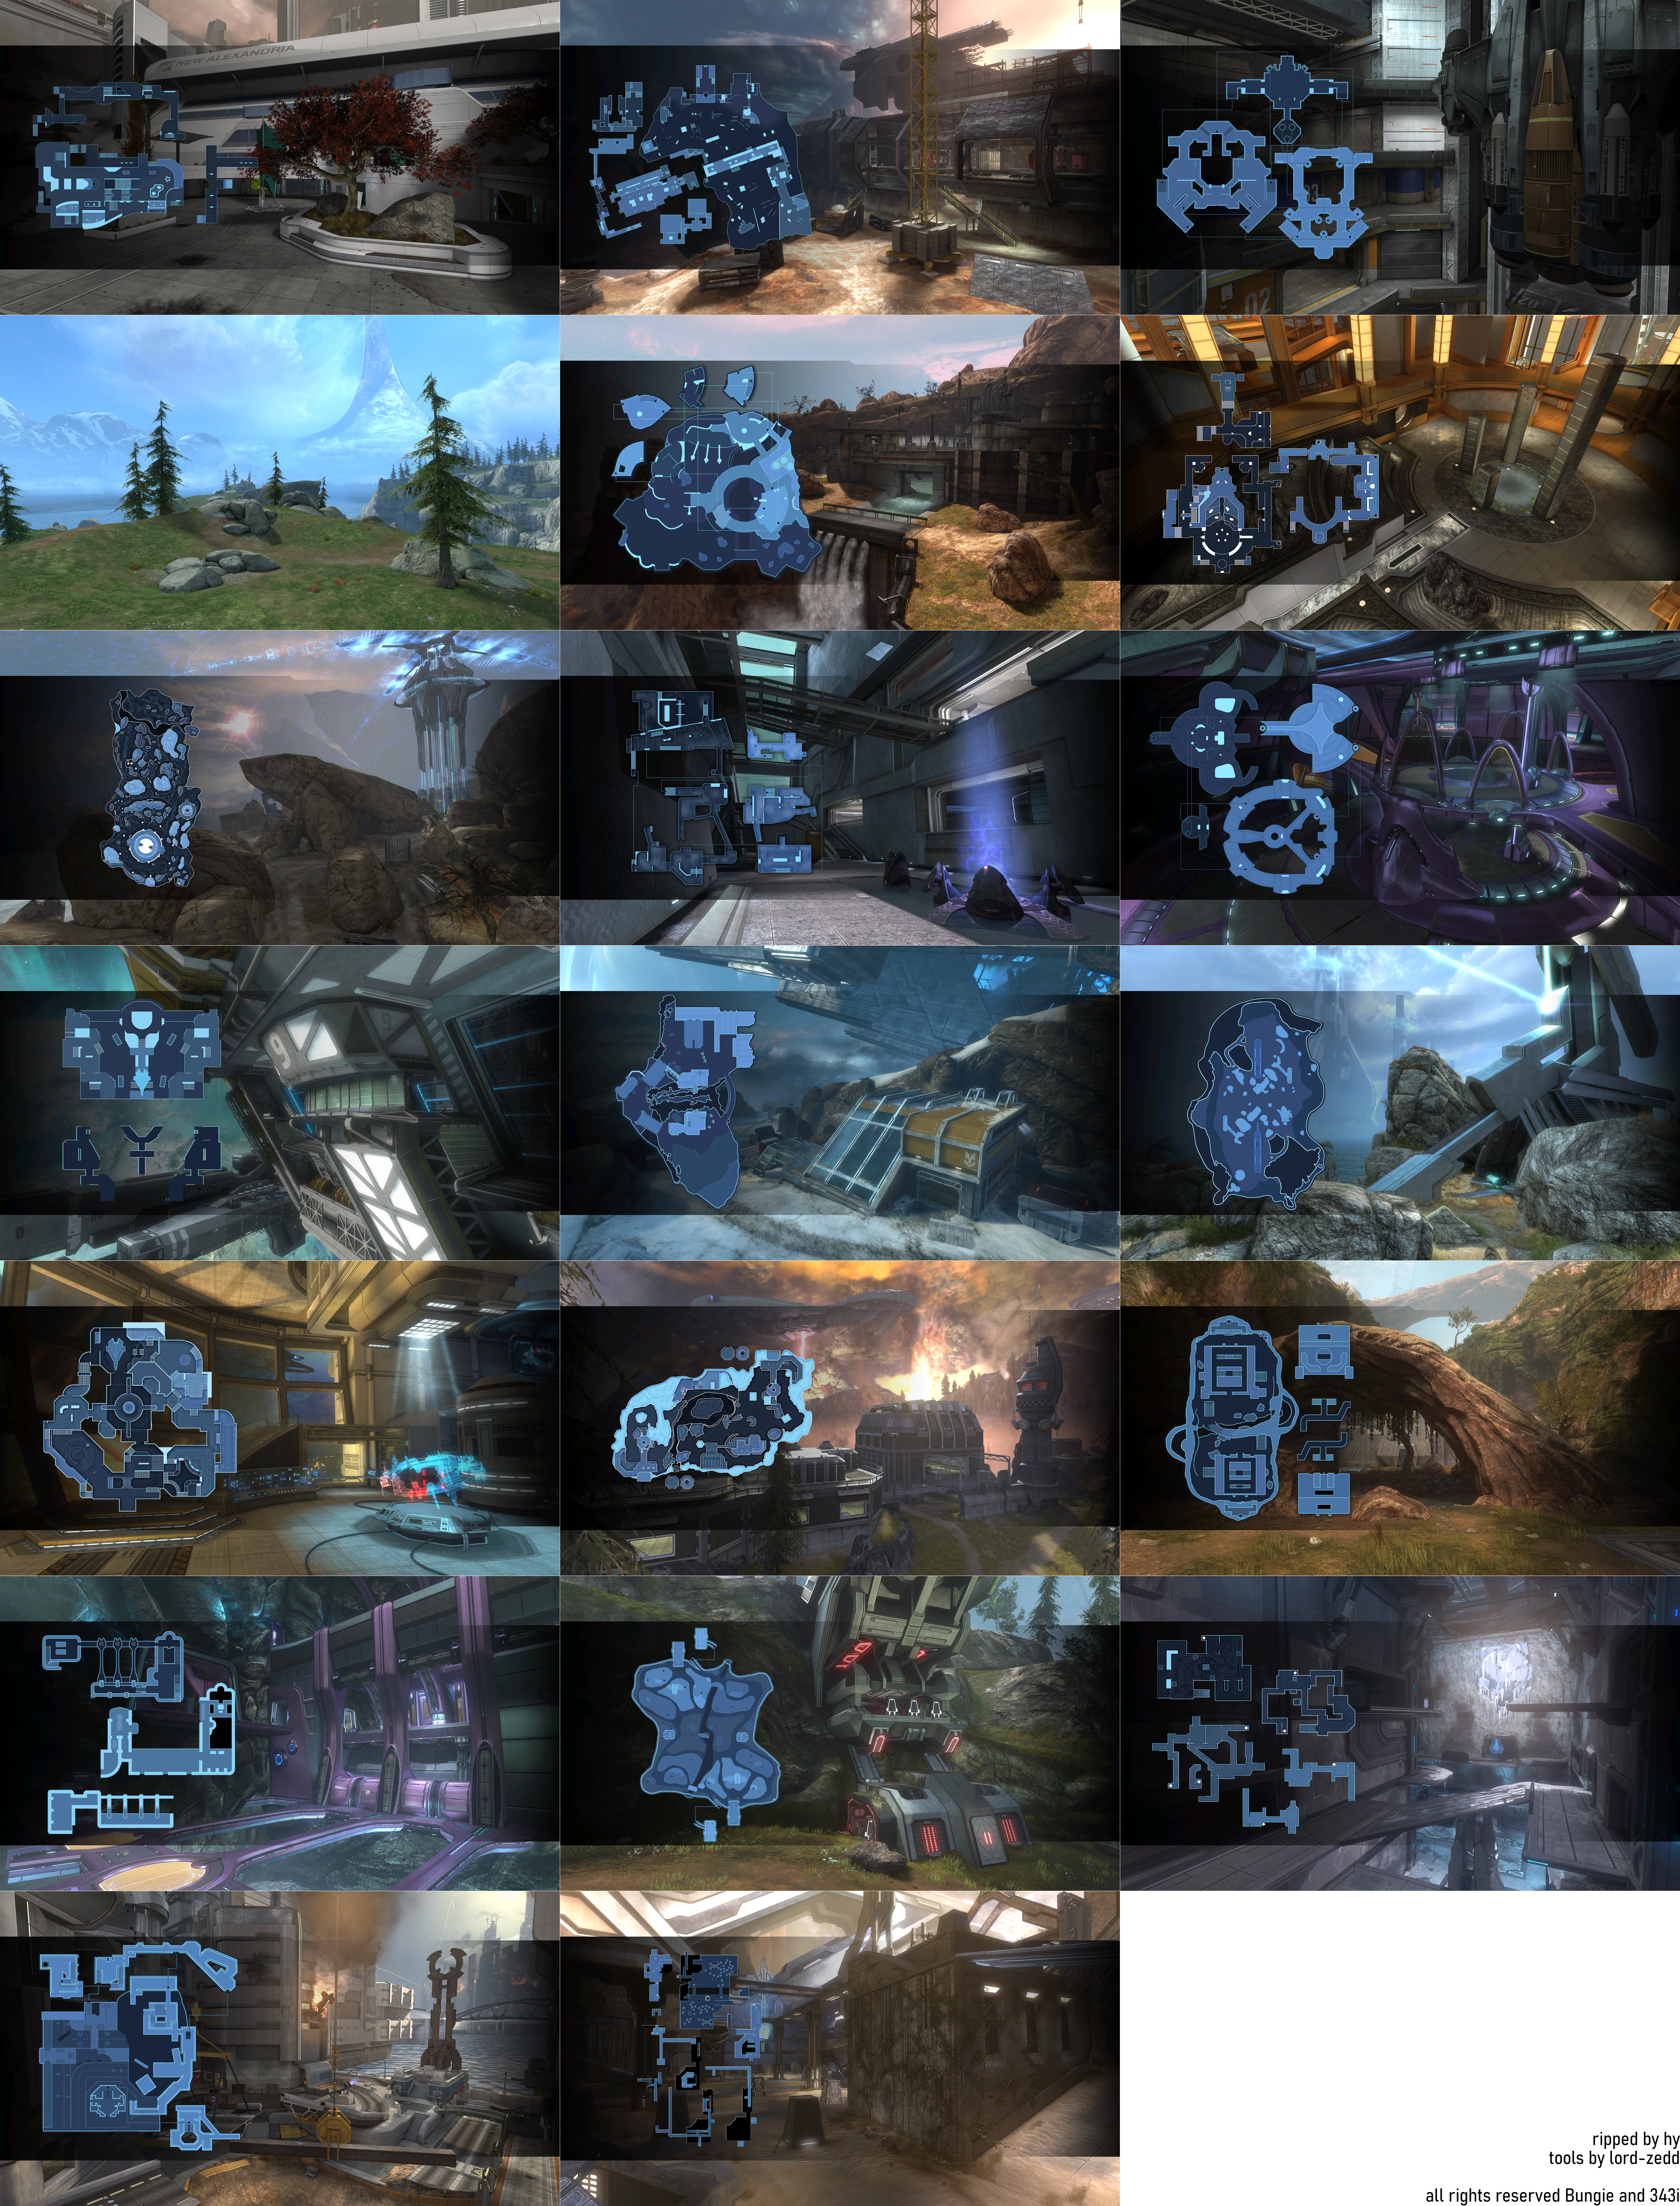 Halo: The Master Chief Collection - Halo: Reach Multiplayer Level Loading Screens